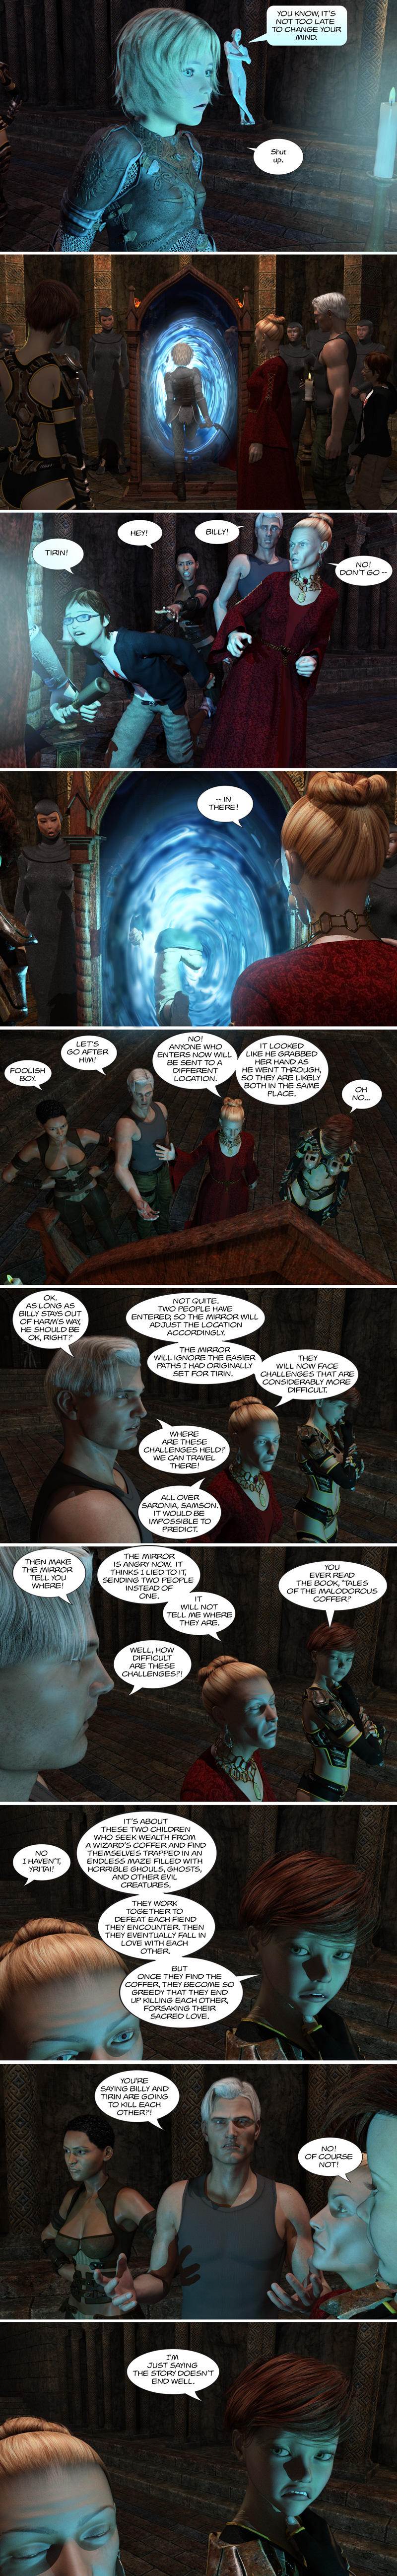 Chapter 12, page 22 – Billy leaps into the mirror